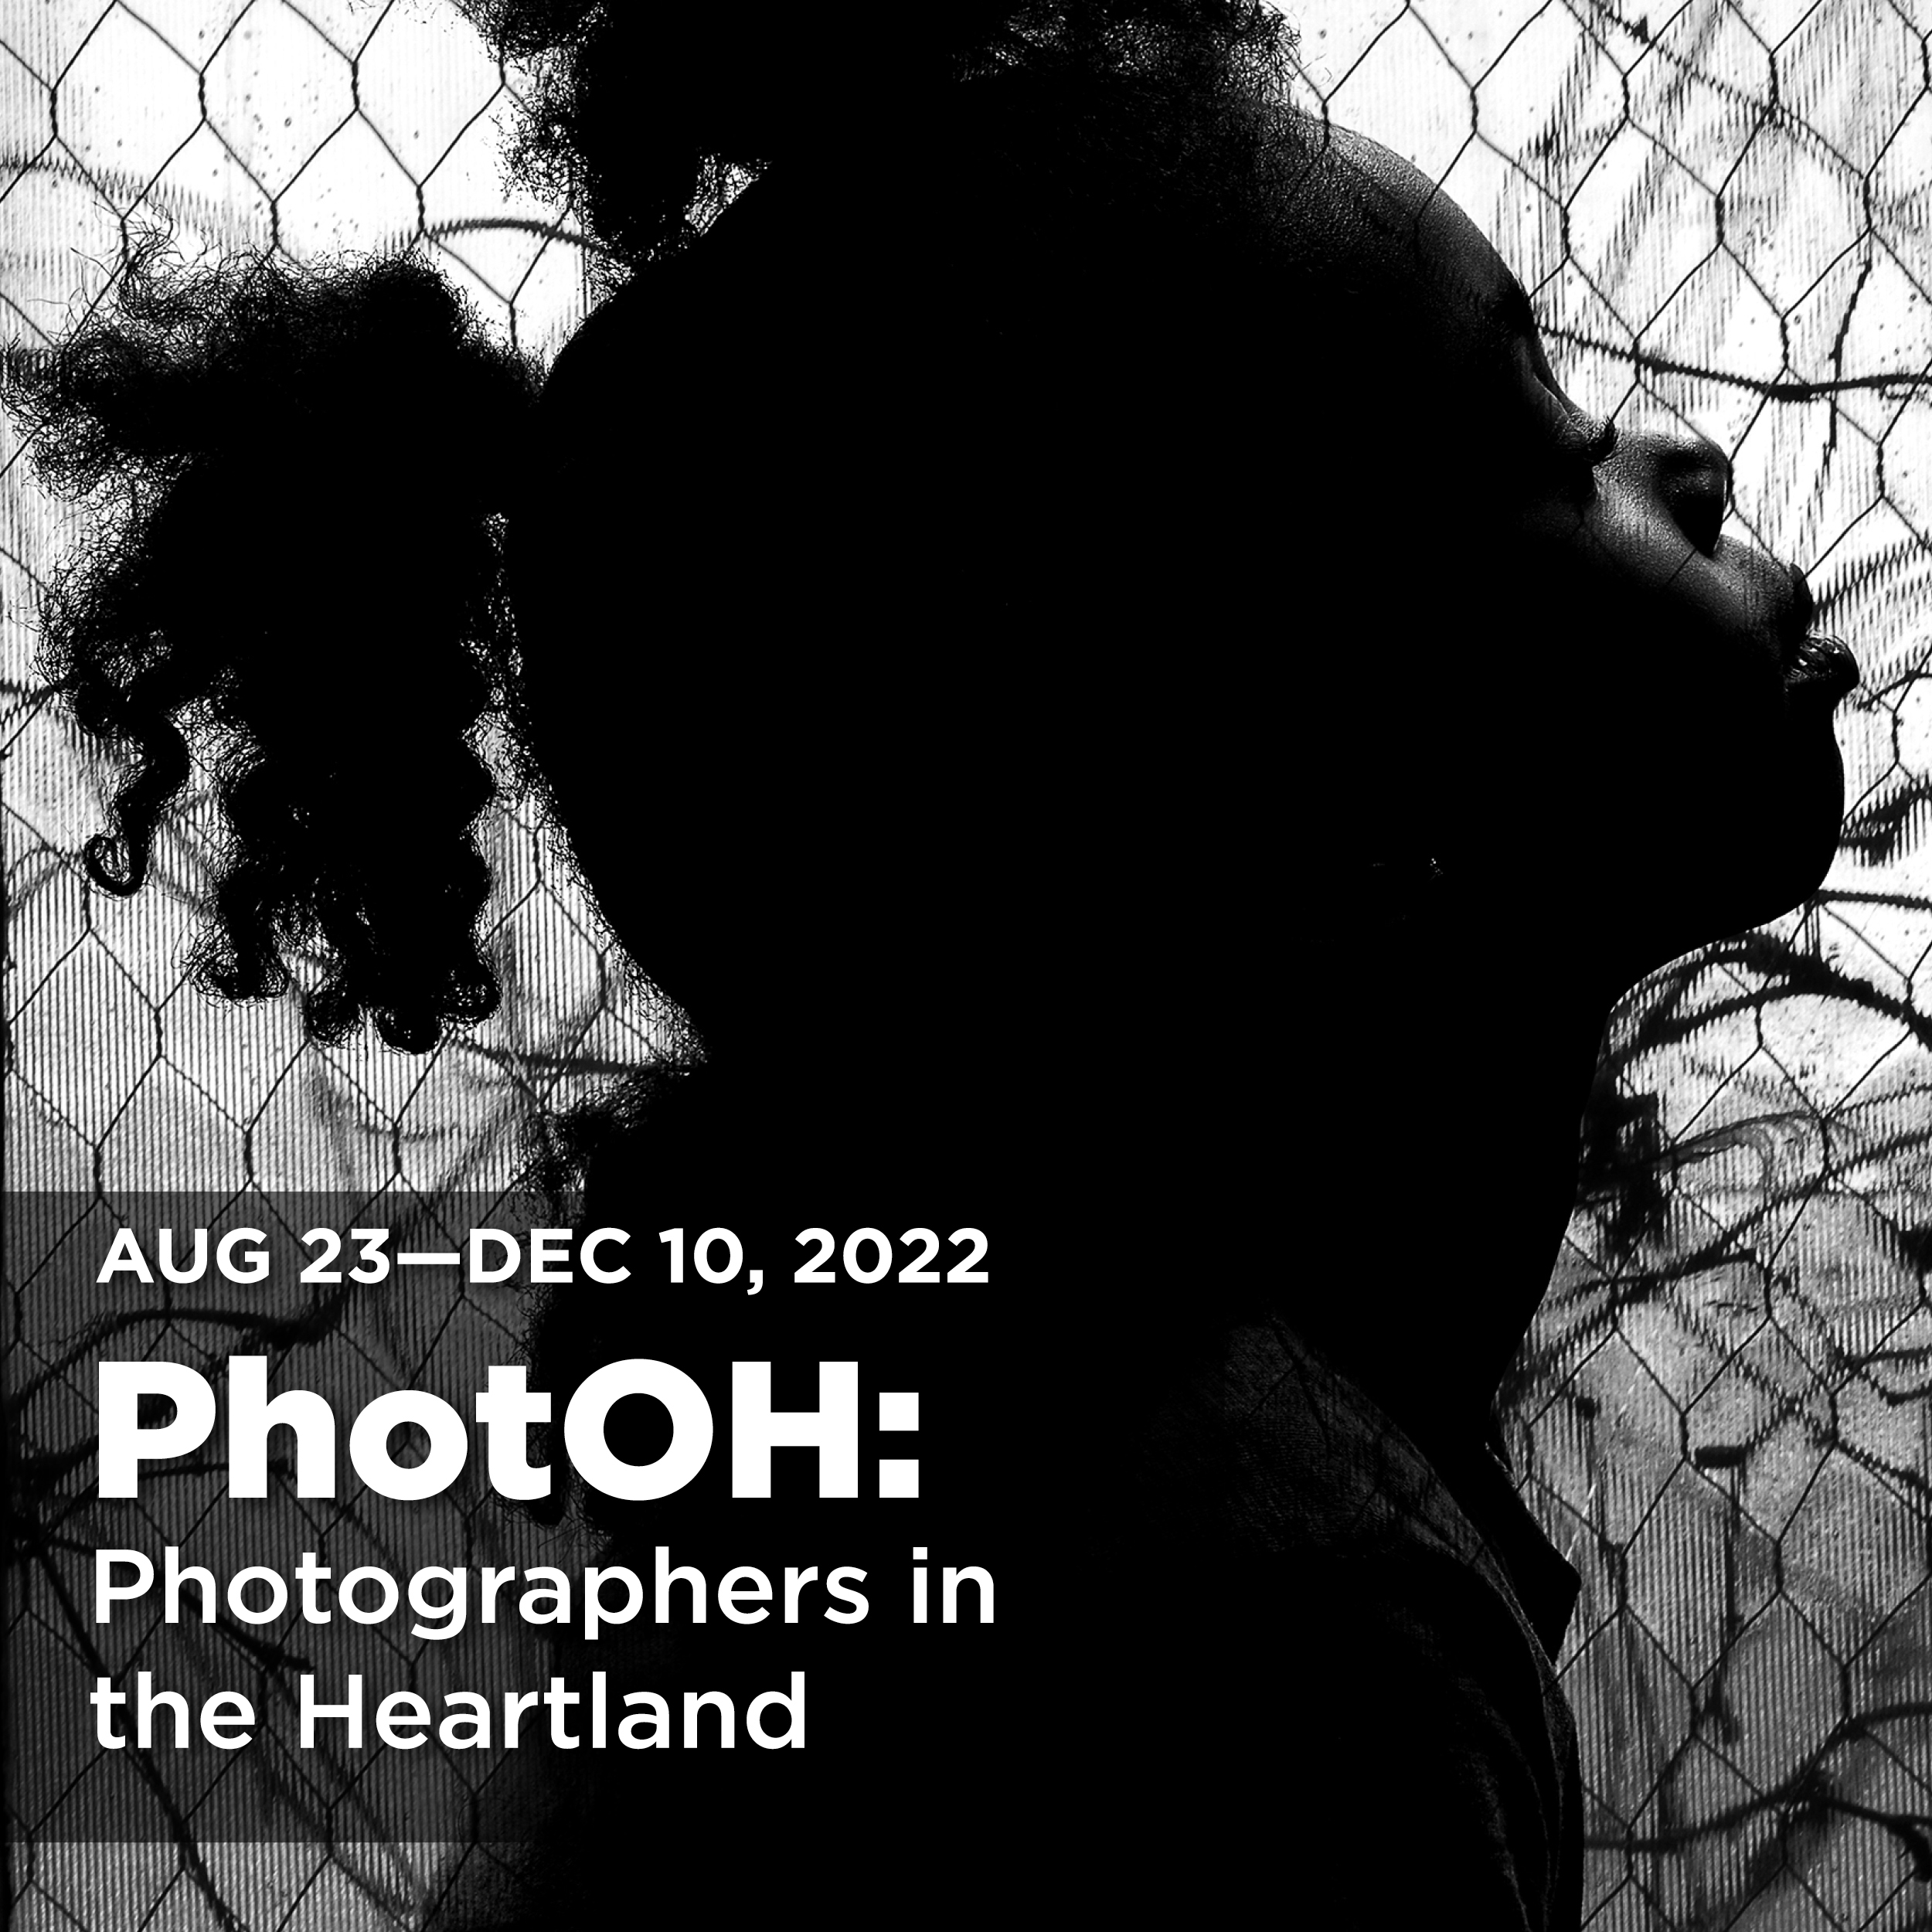 PhotOH: Photographers in the Heartland August 23-December 10, 2022